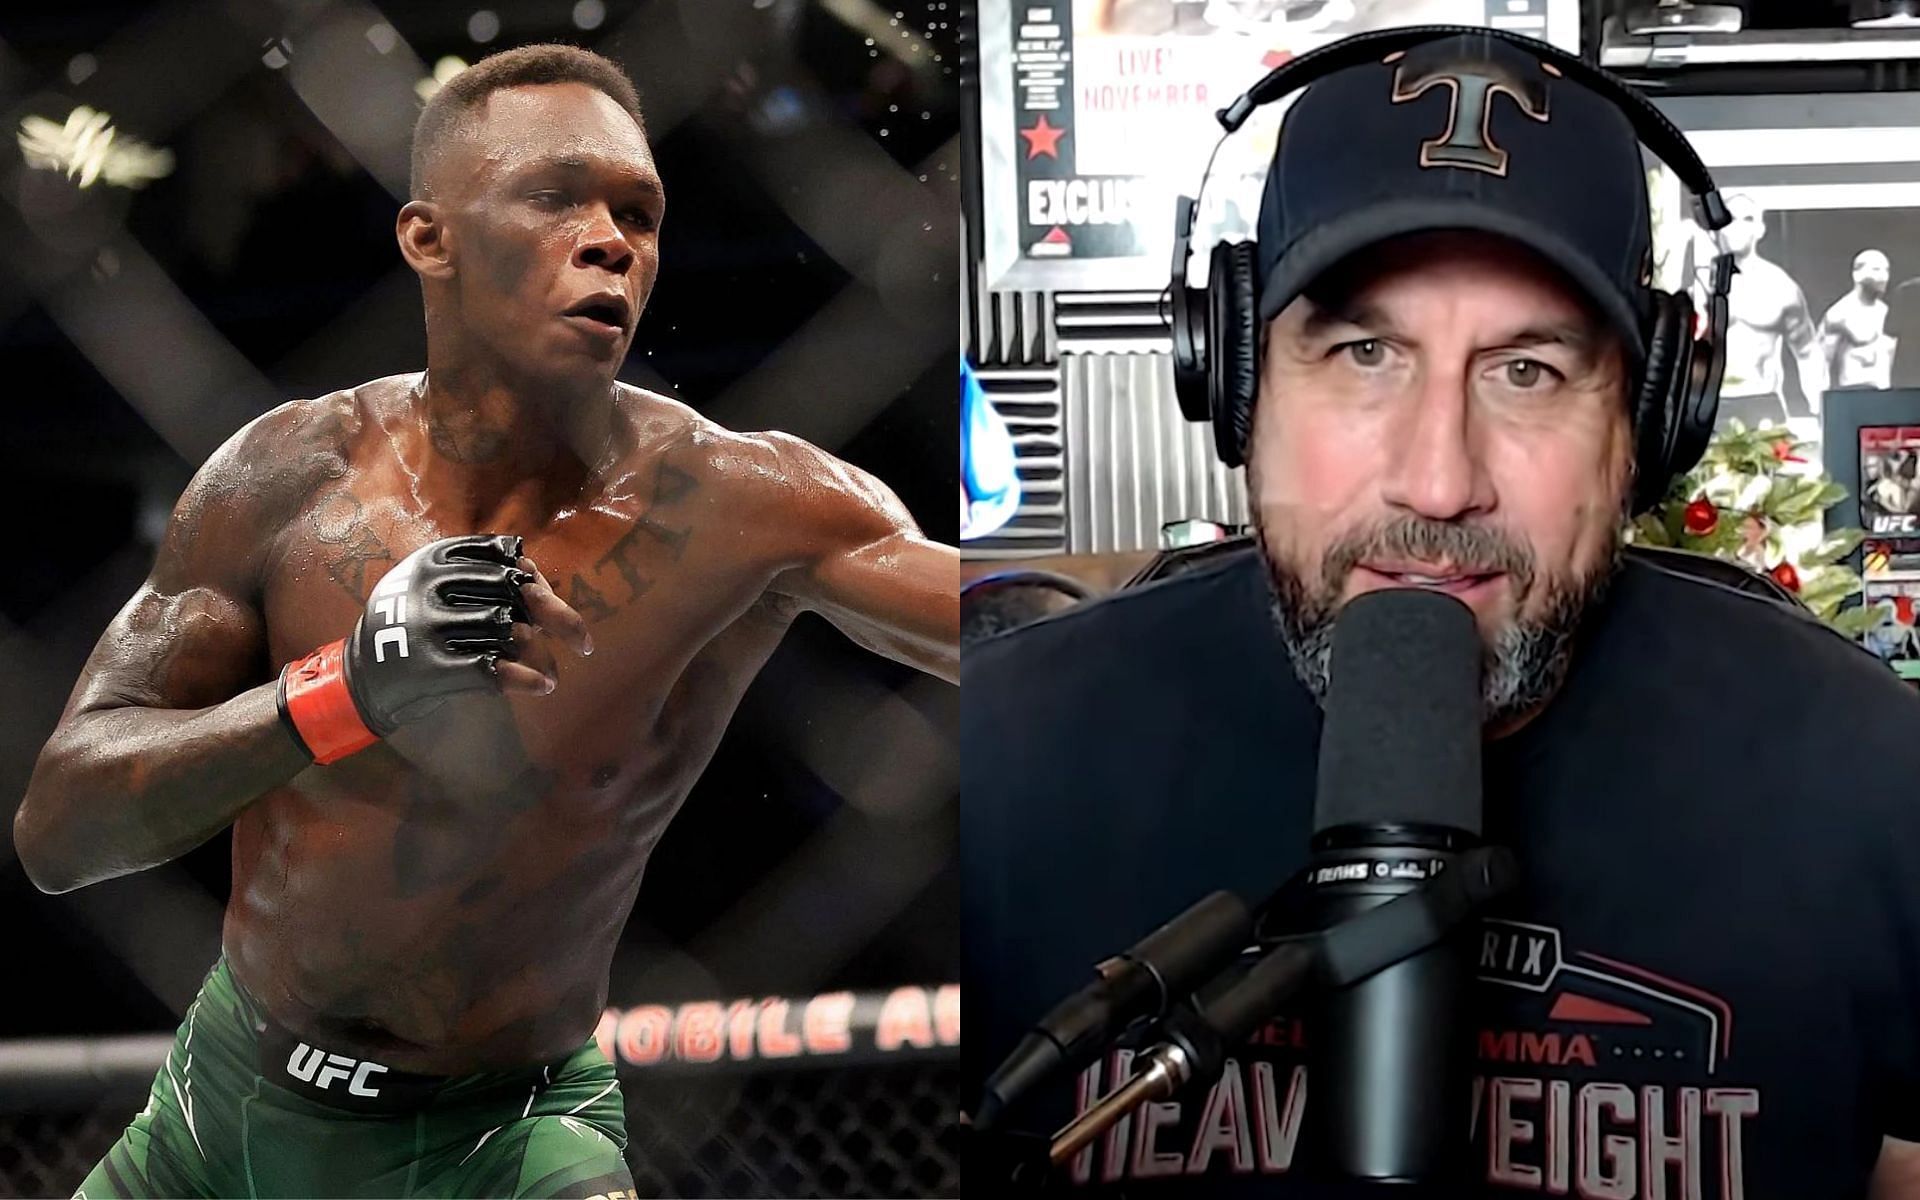 Israel Adesanya (left) and John McCarthy (right) [Photo credit: Weighing In Extra on YouTube]